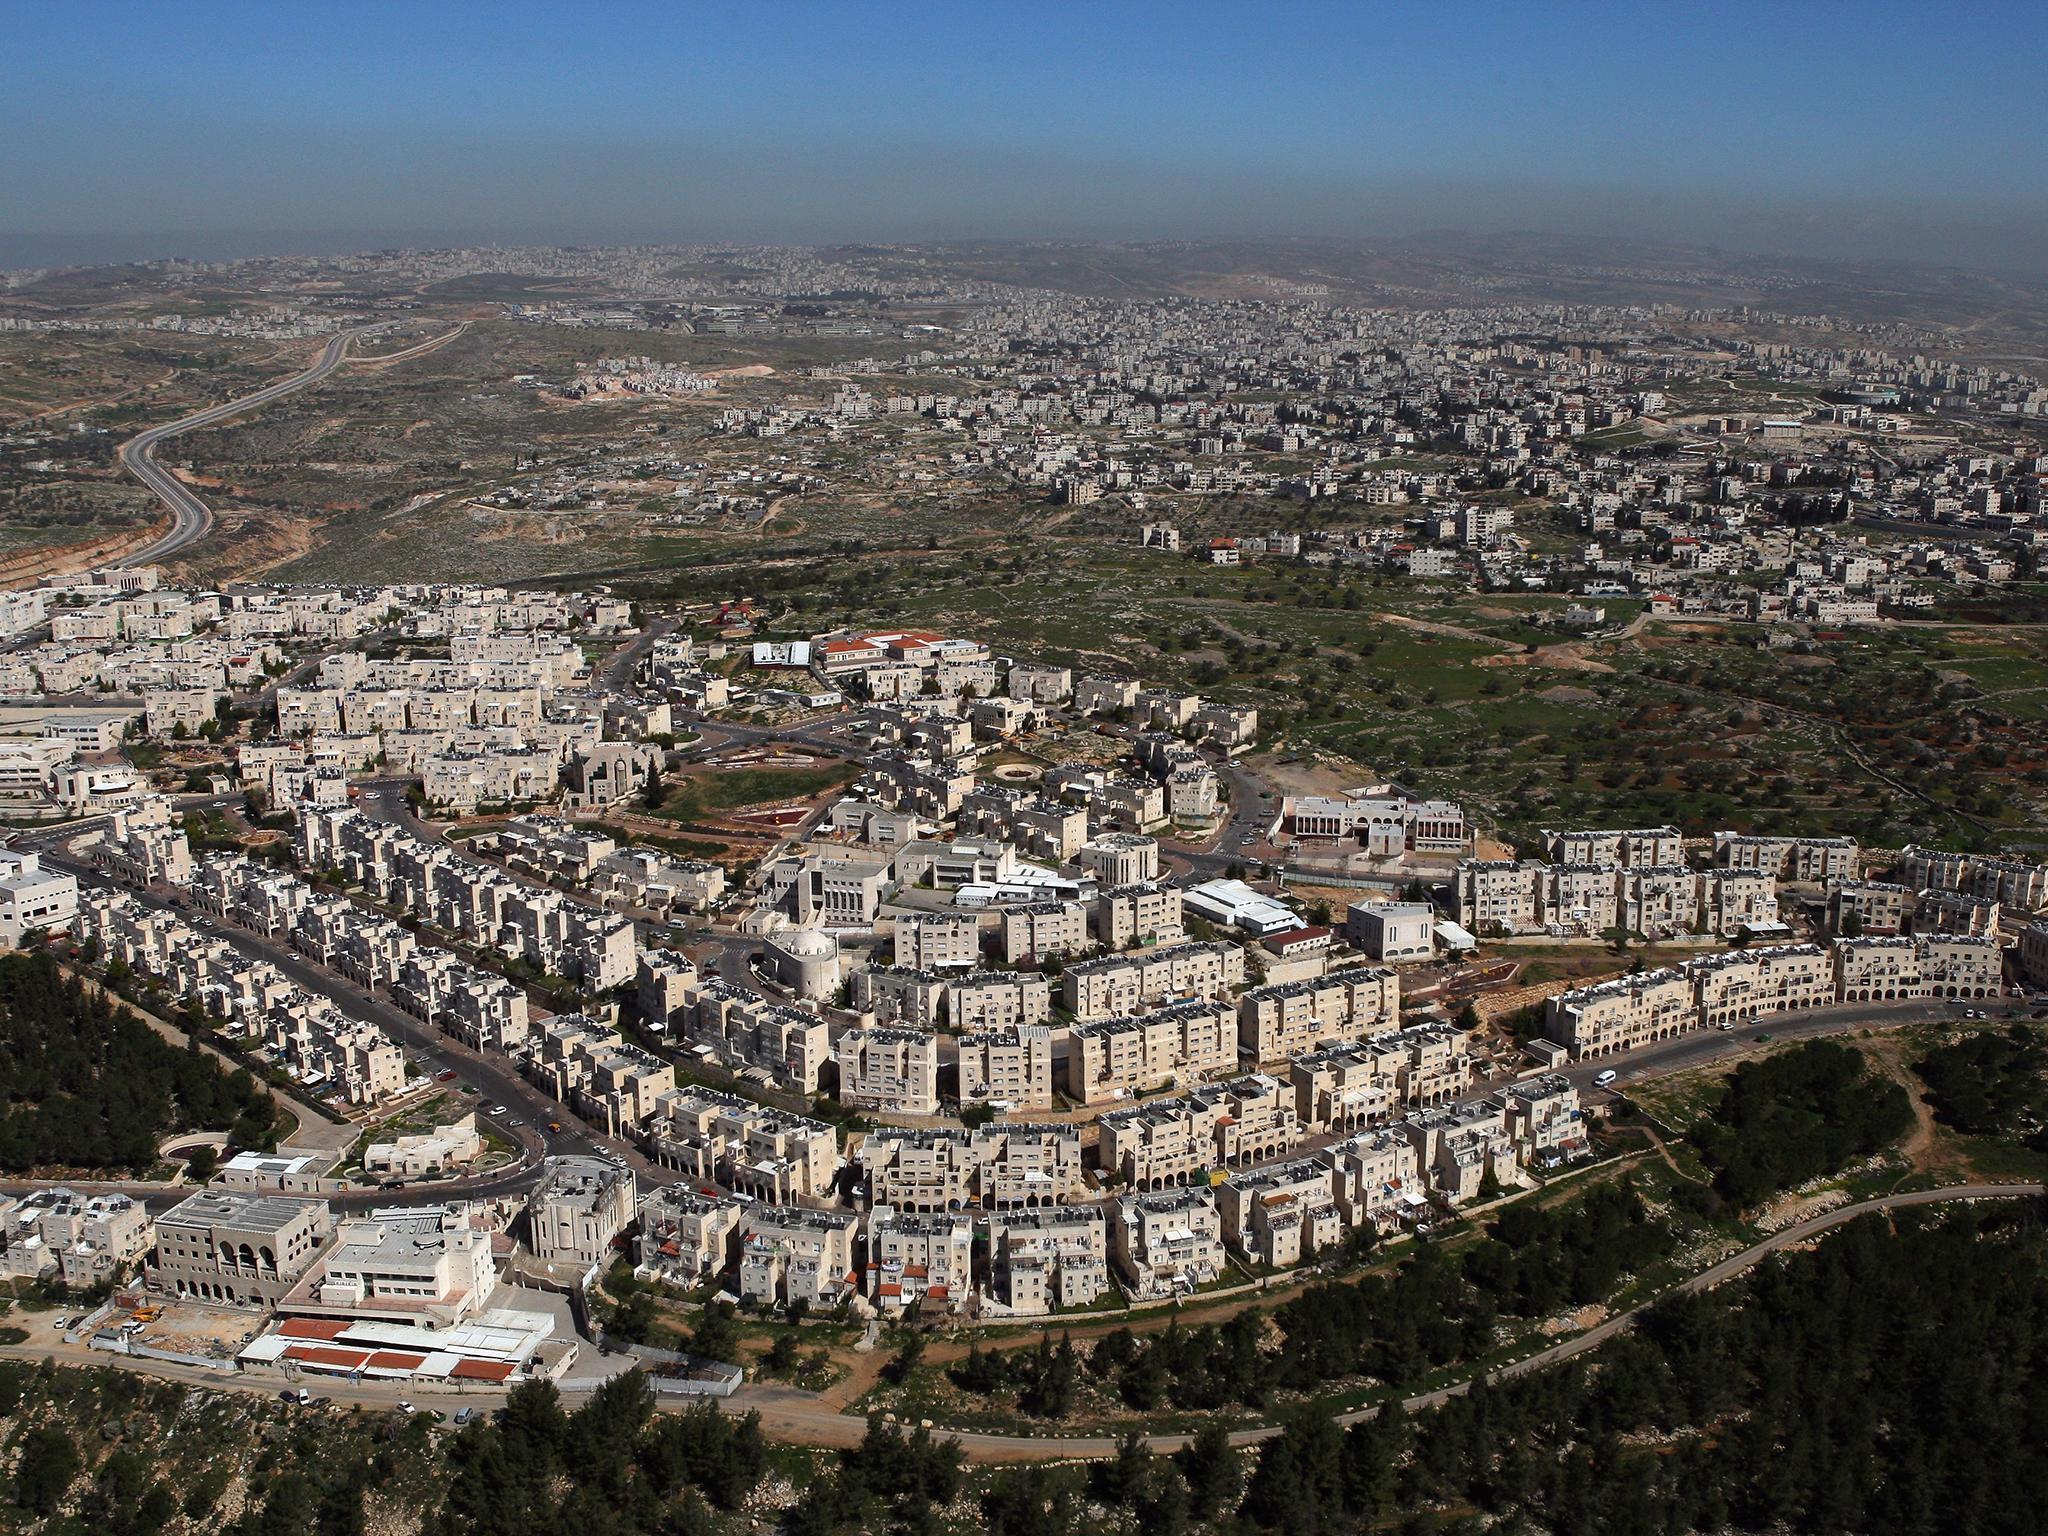 Israeli settlement building in East Jerusalem has accelerated in recent years